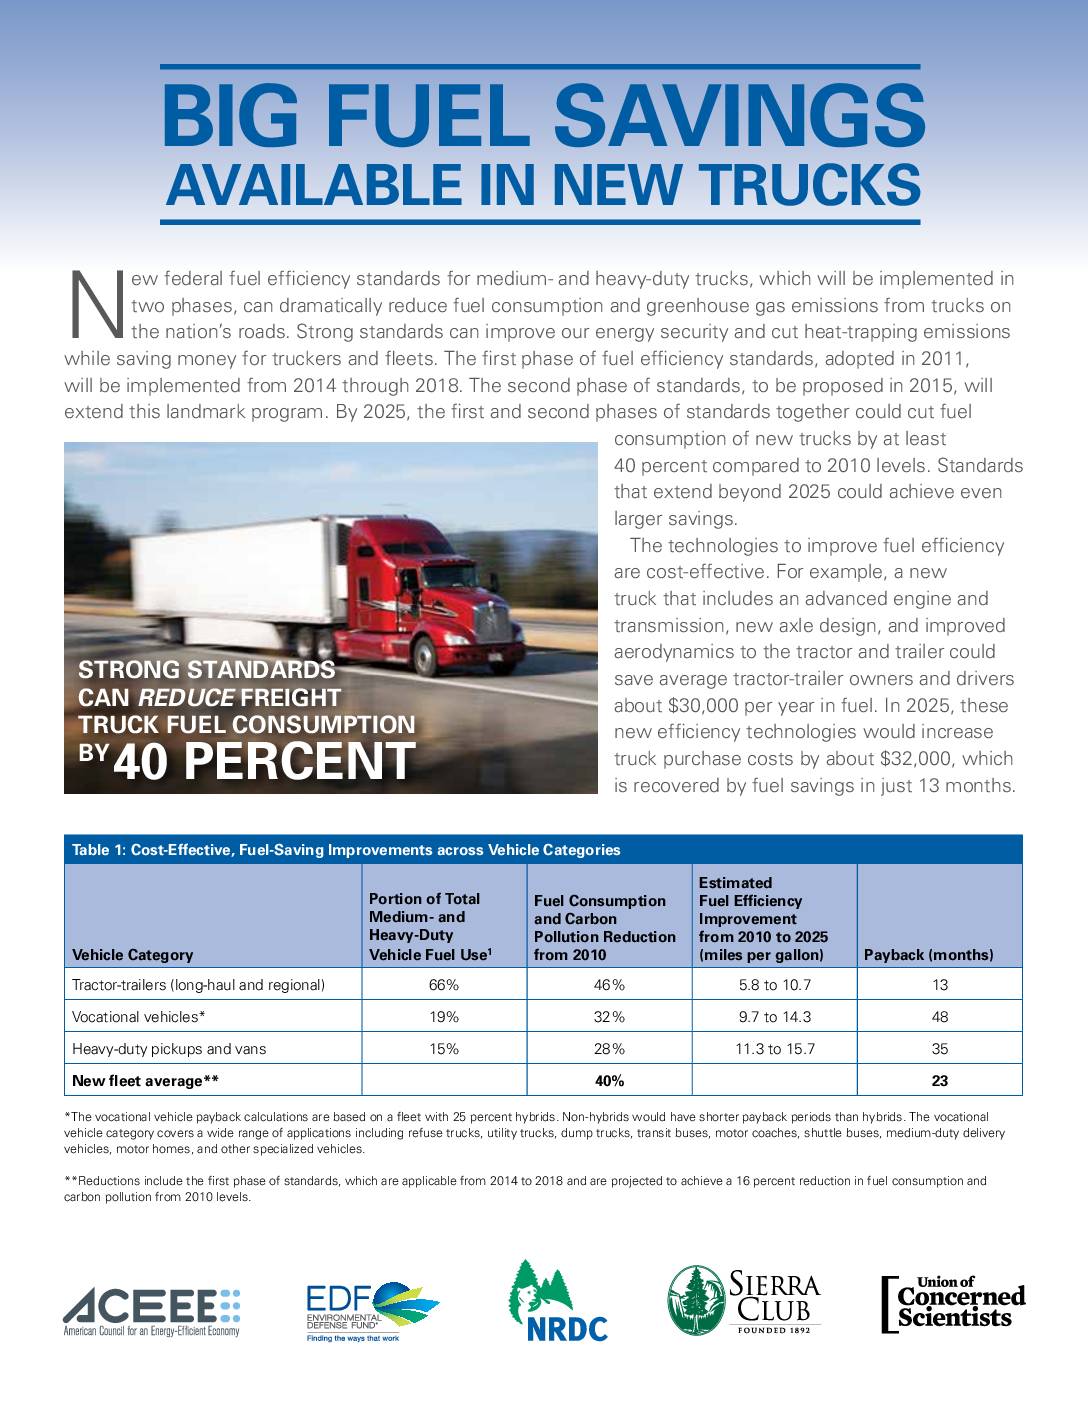 Big Fuel Savings Available in New Trucks